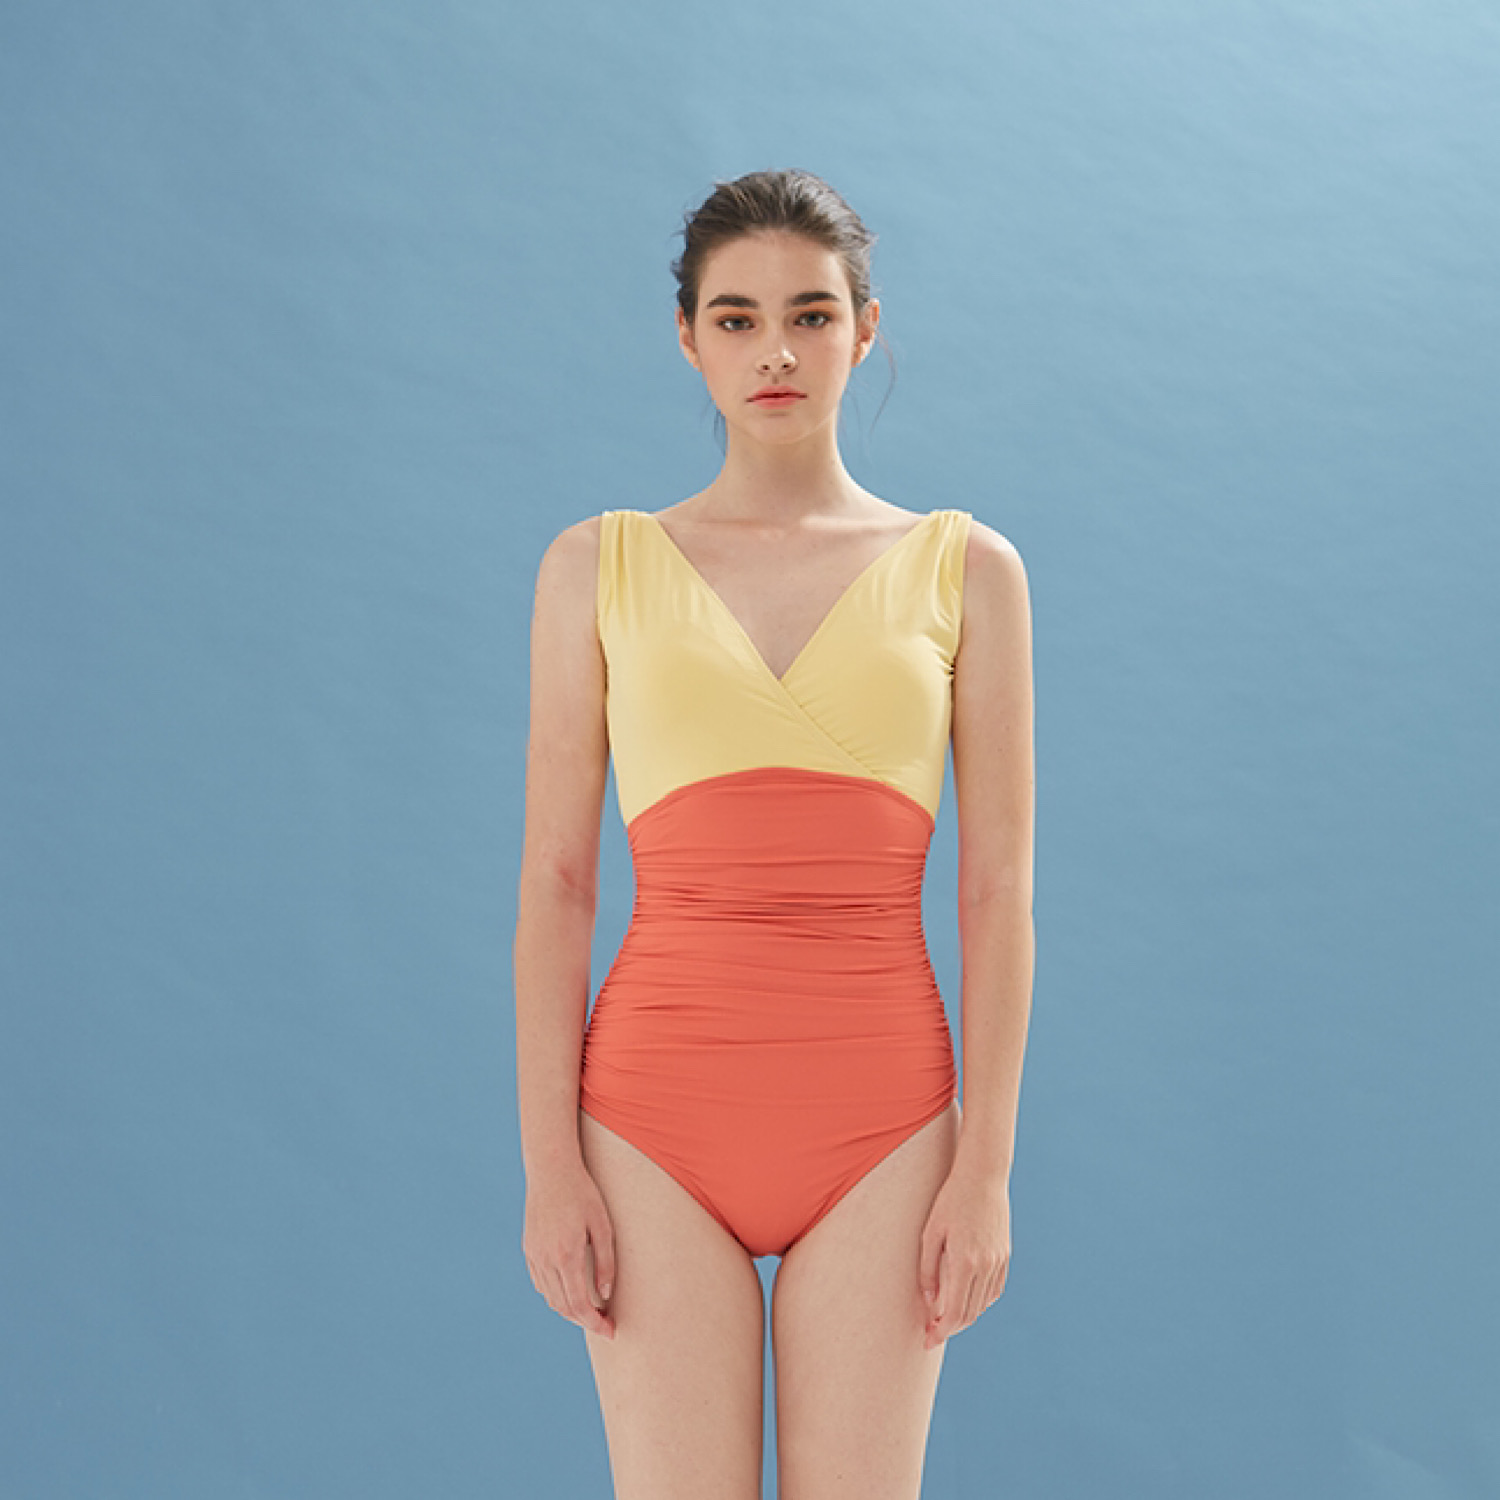 Cutting Dress Swimming Suit (Yellow/Corral)